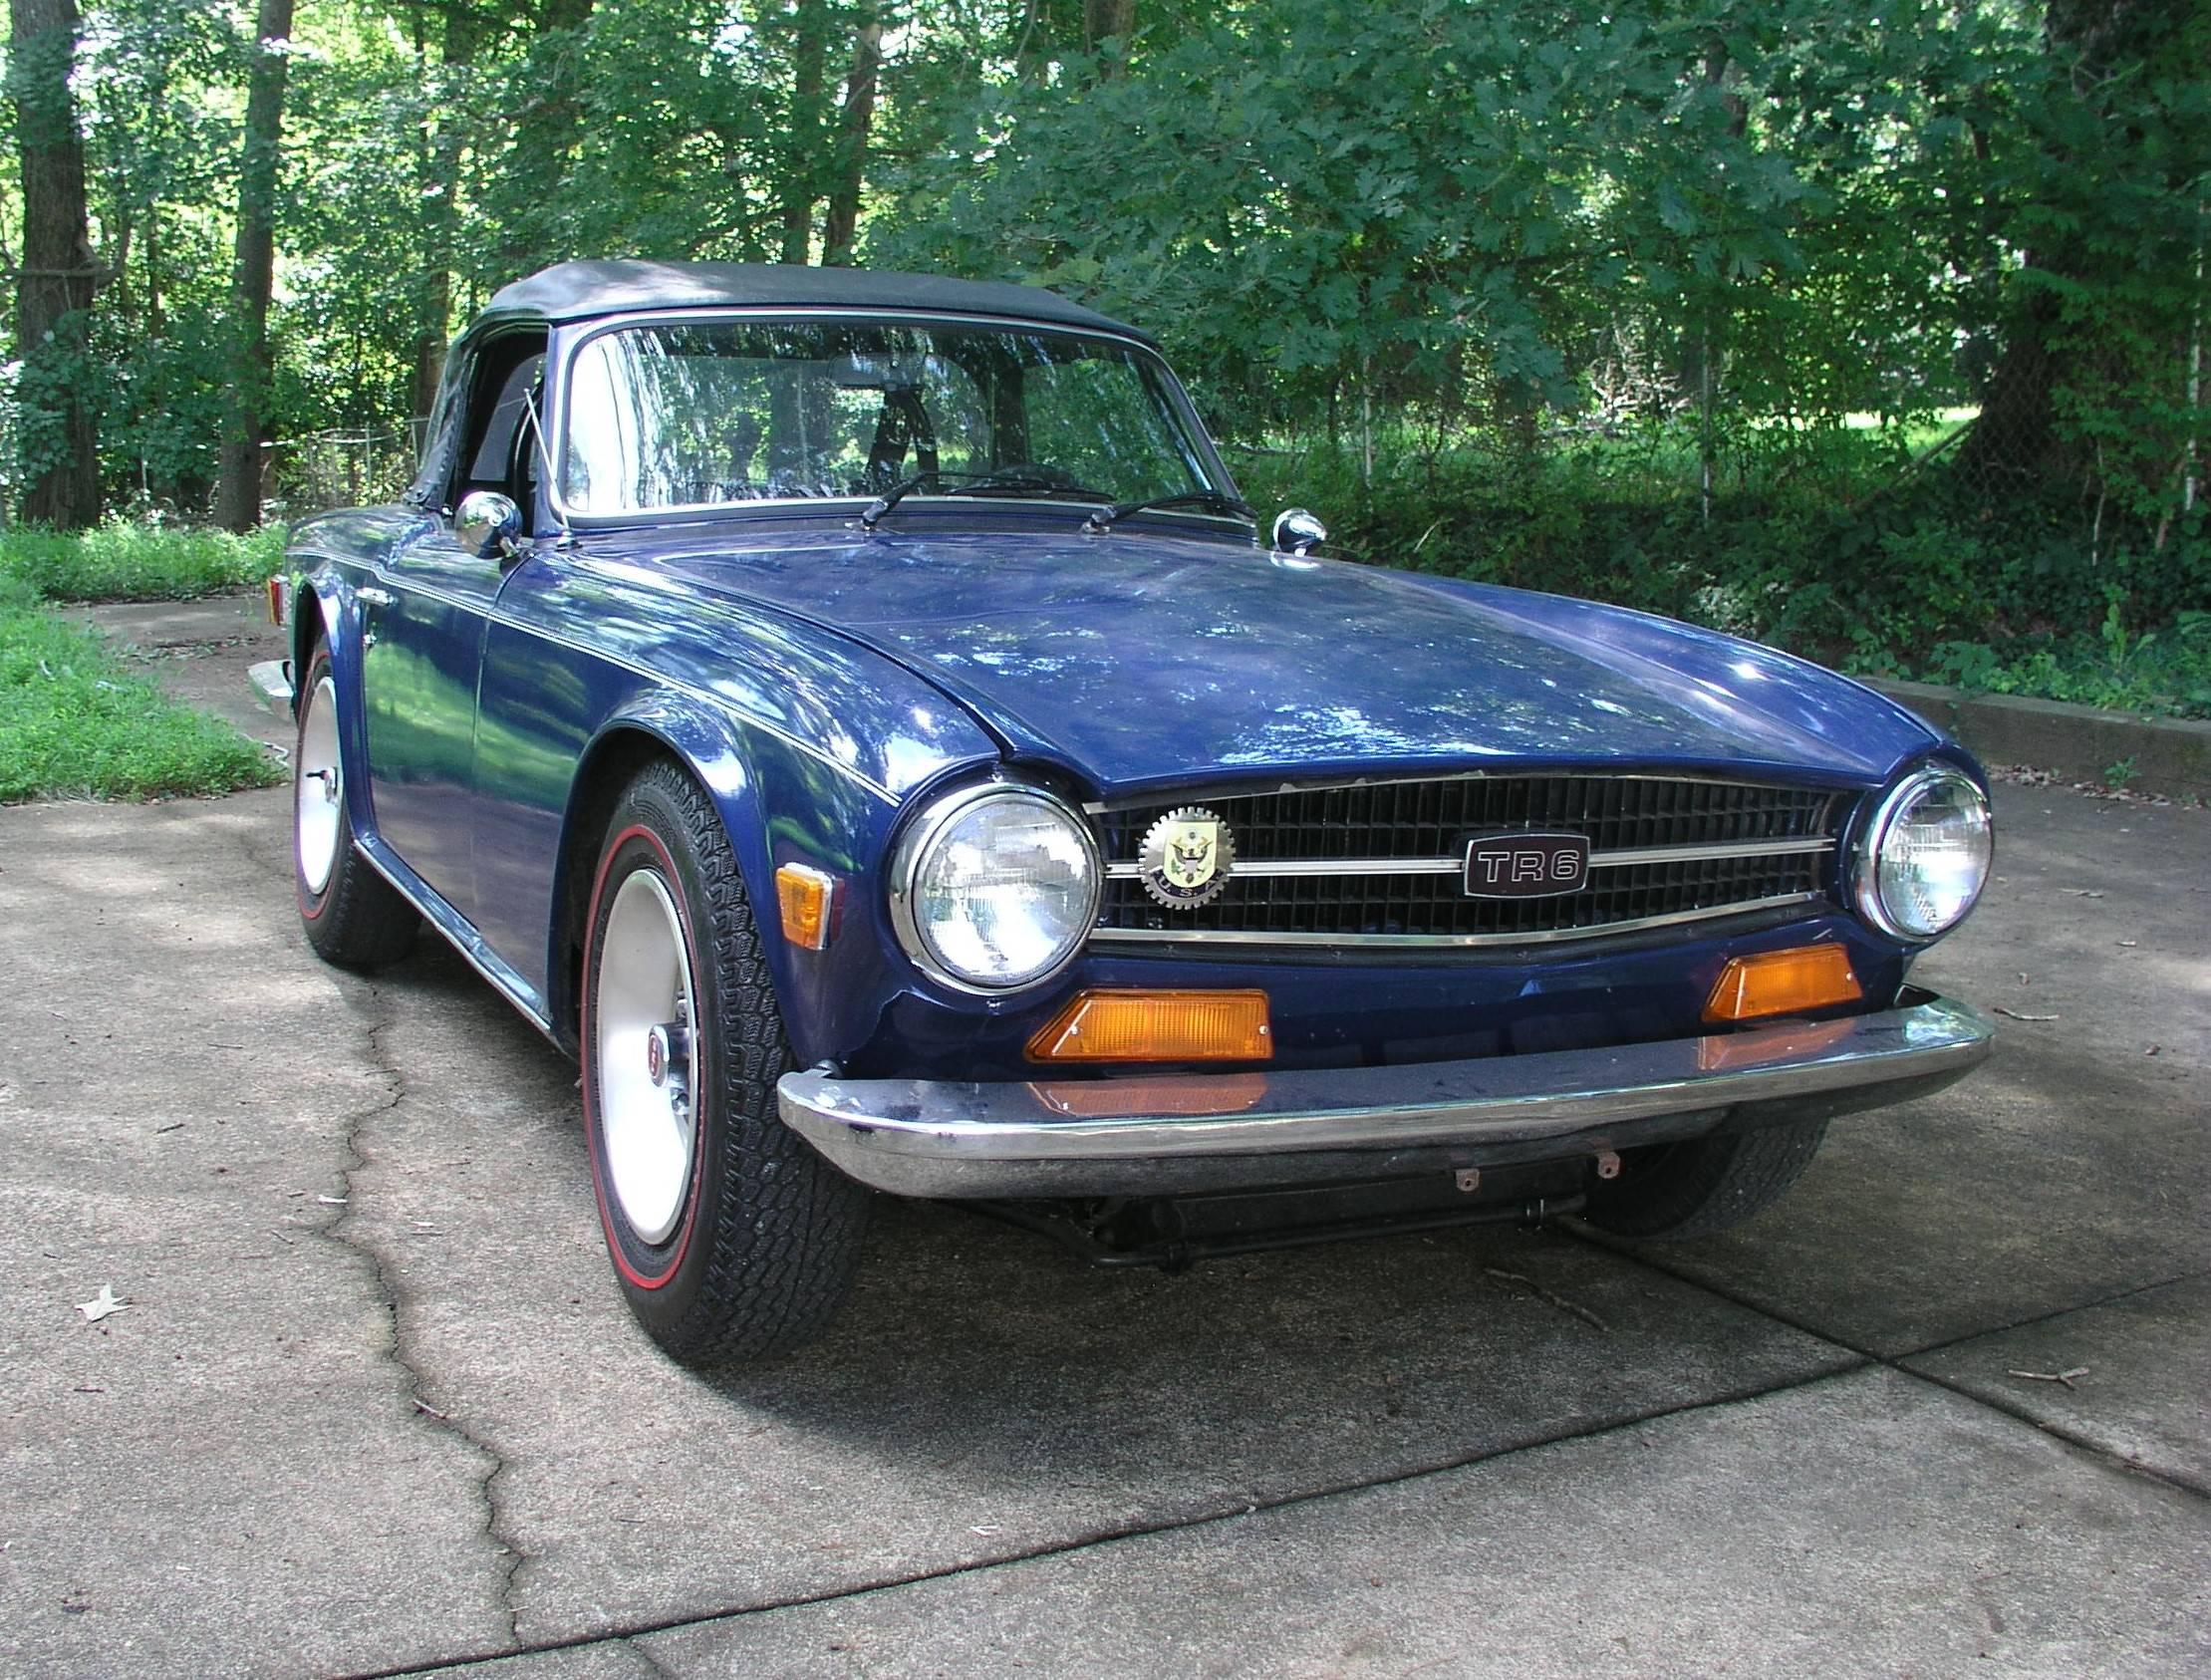 1973 Triumph TR6 Convertible. 4 speed with optional over drive. New 'Red Li